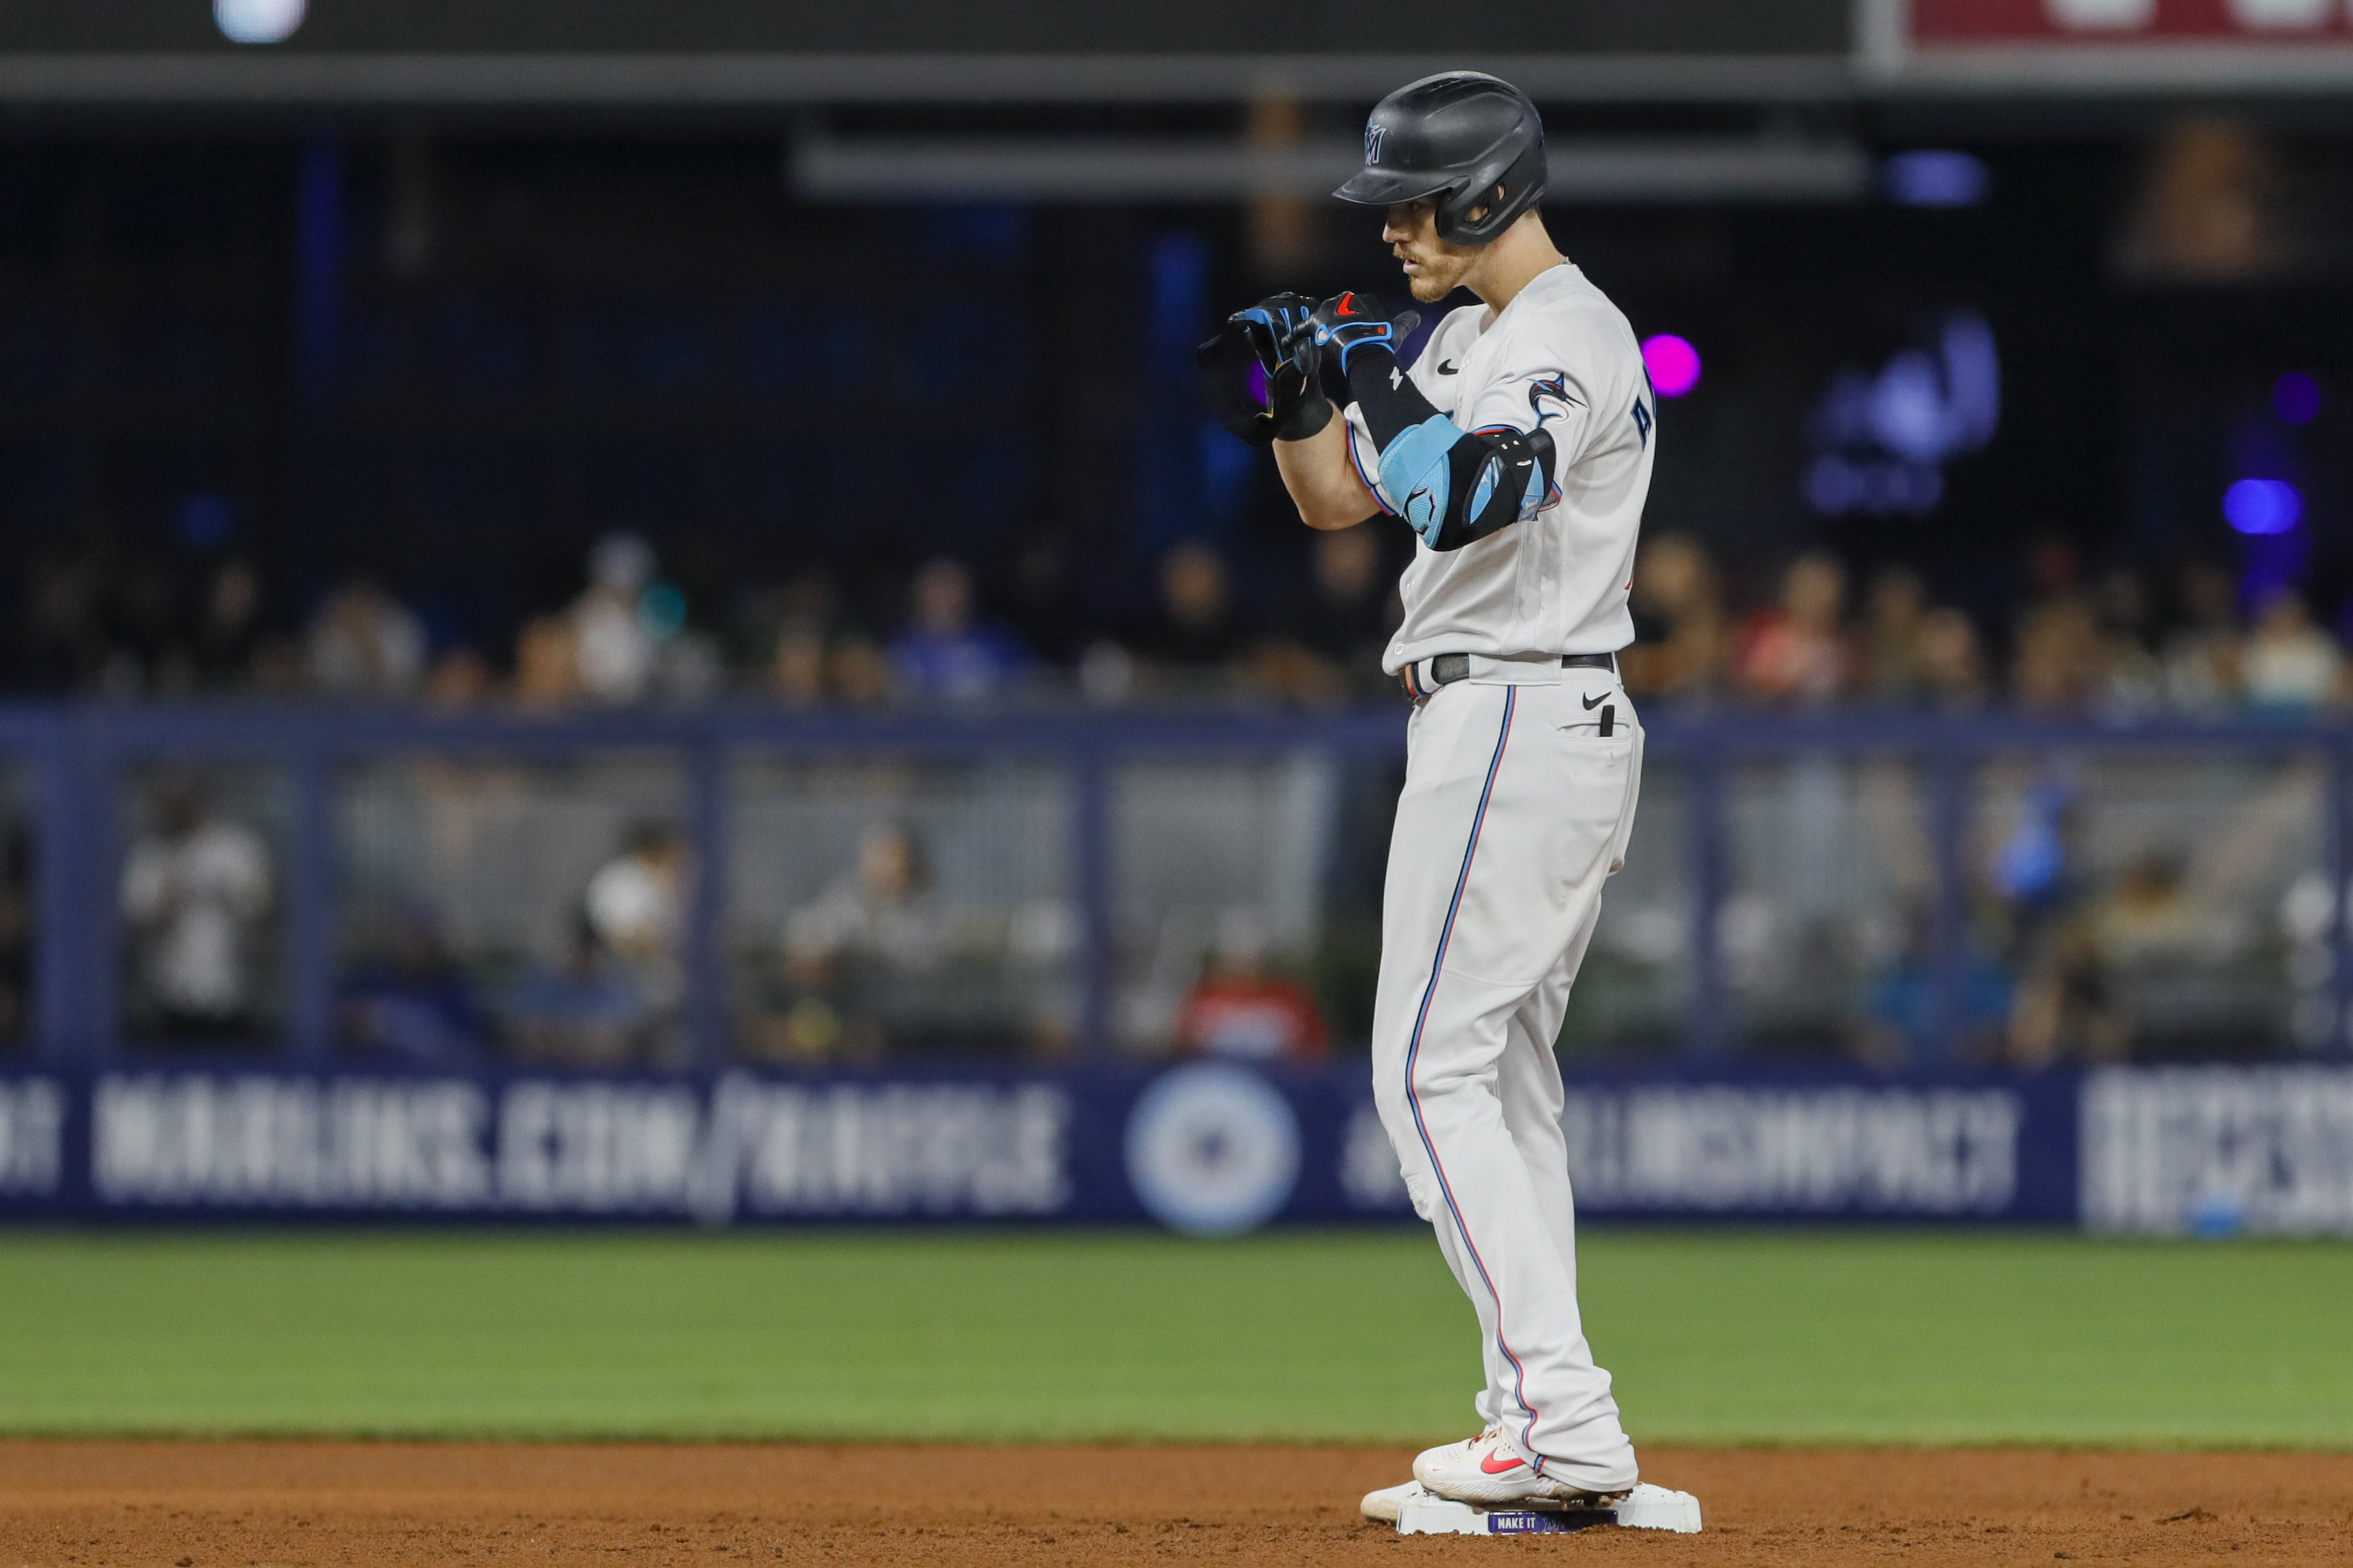 Miami Marlins third baseman Brian Anderson (15) reacts from second base after hitting a double in the fifth inning against the Seattle Mariners at loanDepot Park.